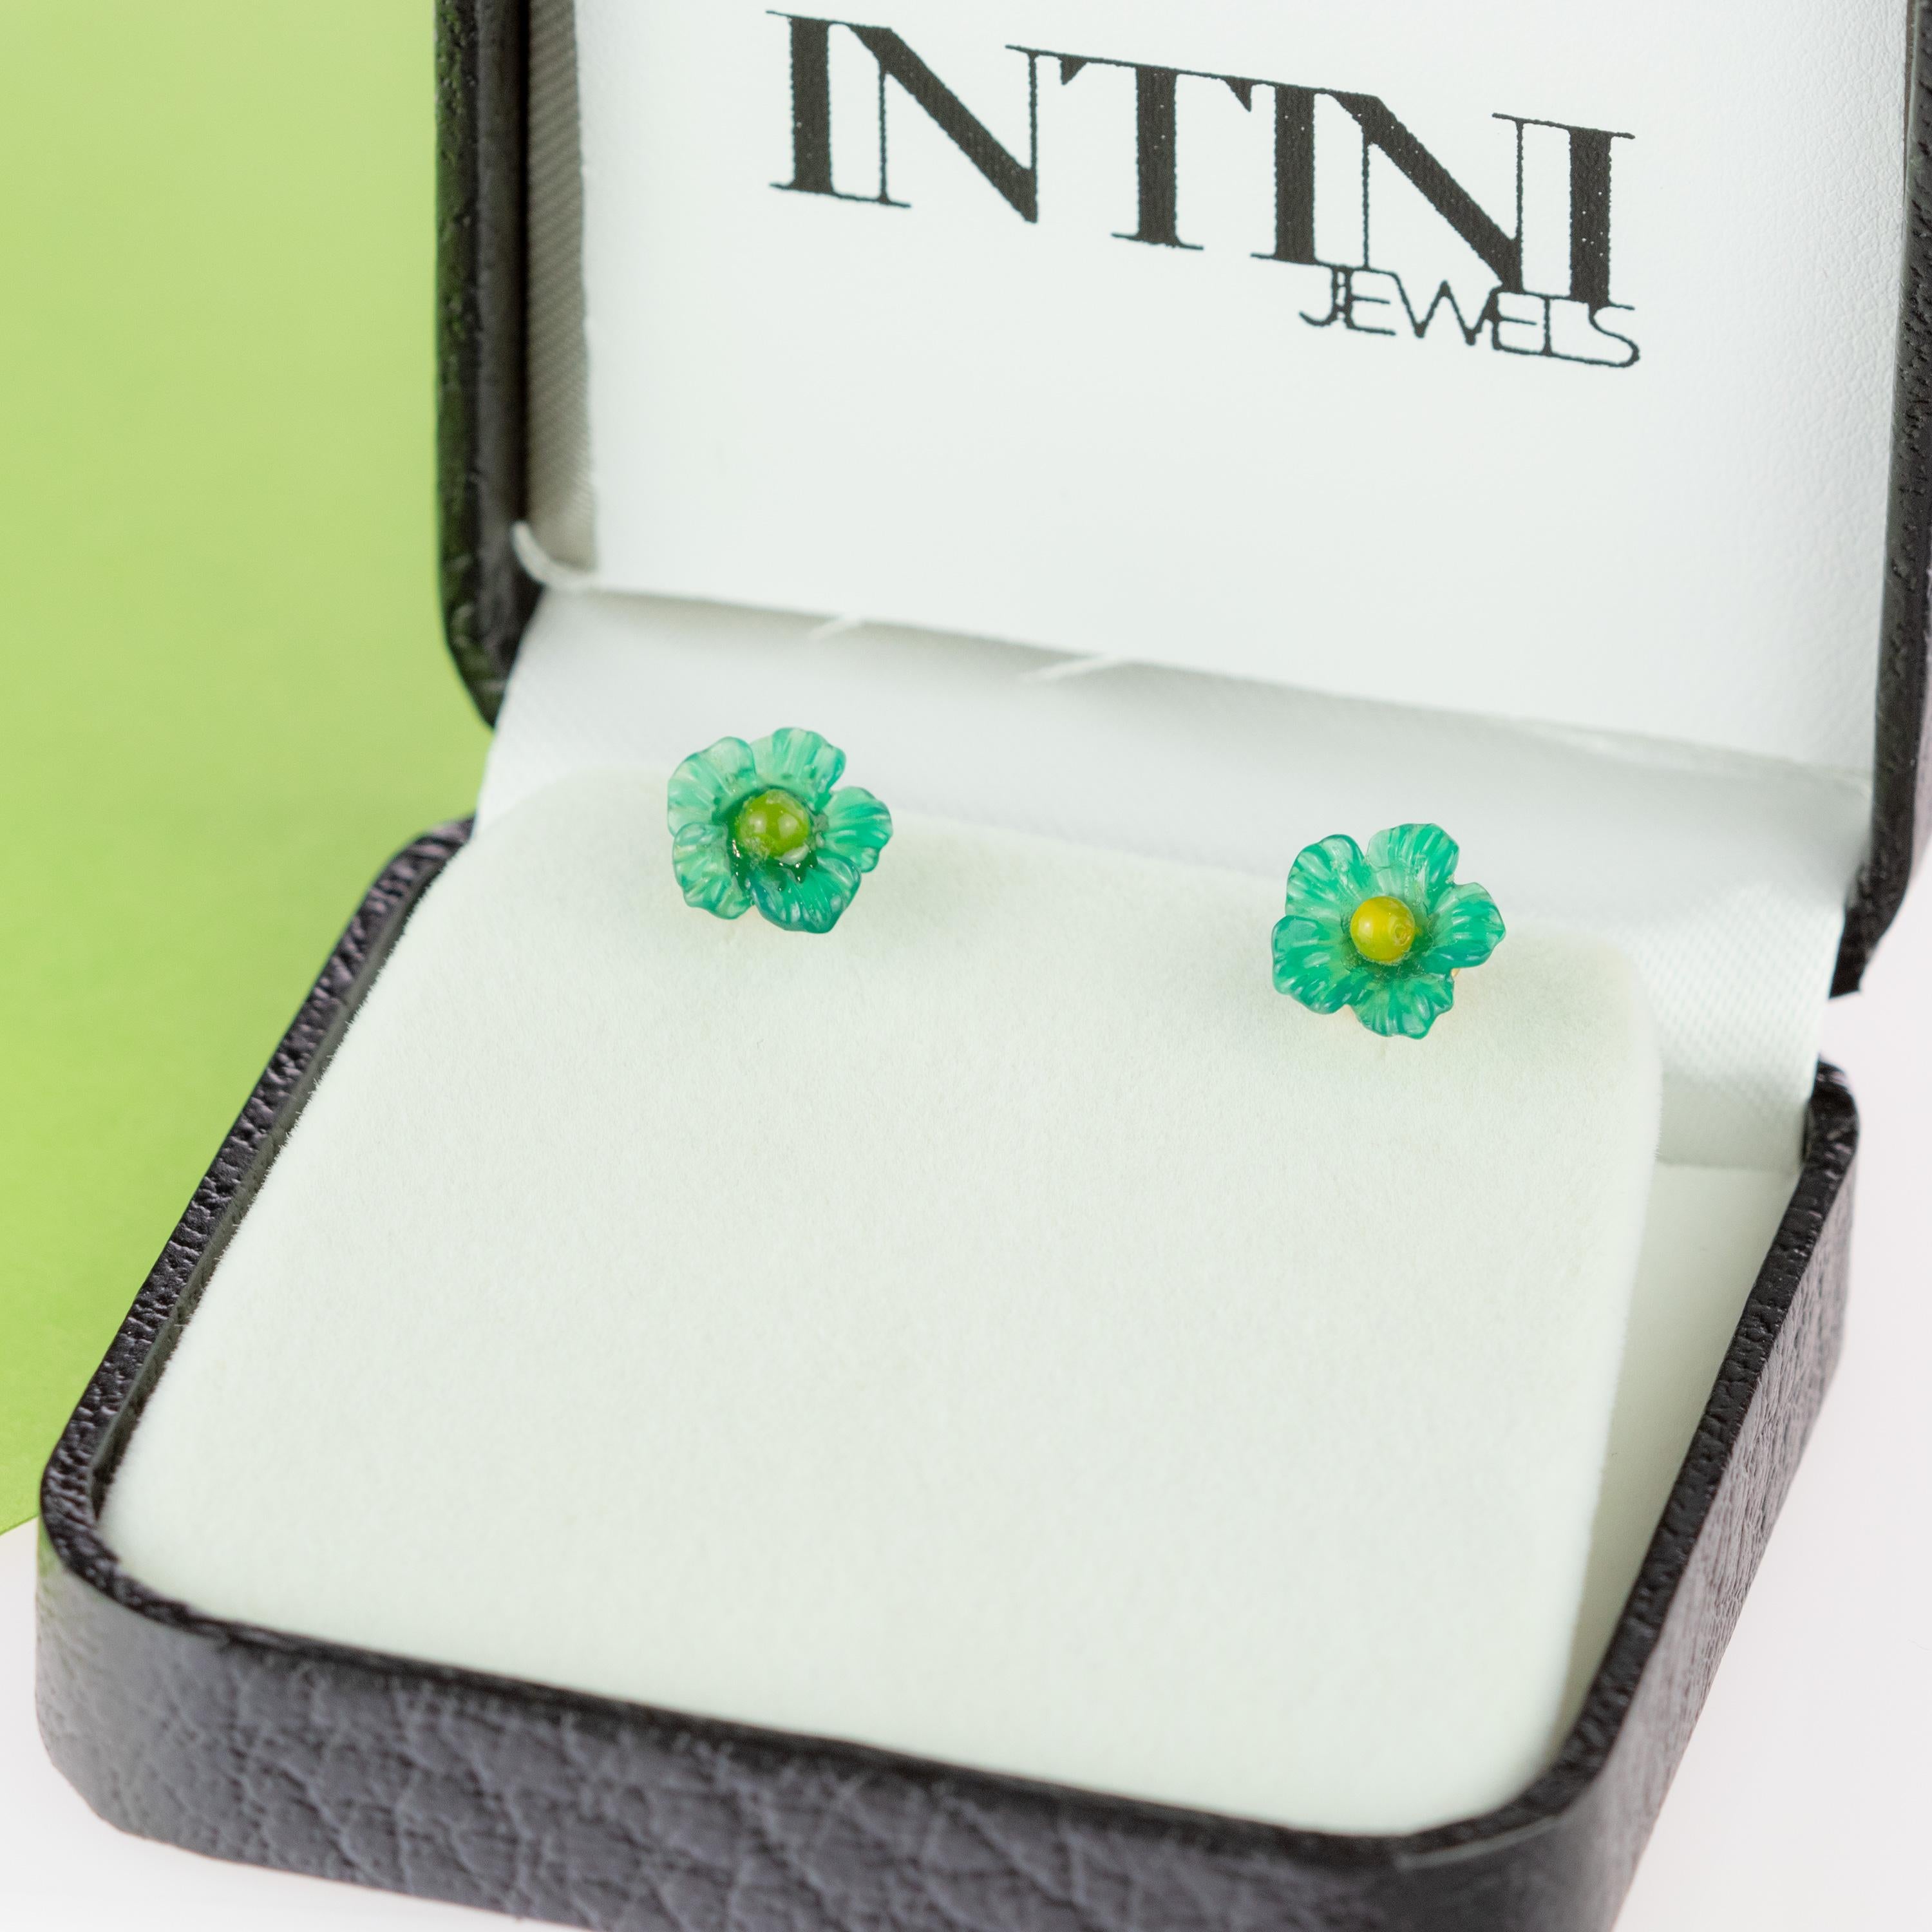 Astonishing and delicate green and yellow 2.5 carat agate flower stud earrings. Carved petals that evoke the italian handmade traditional jewelry work wrapping itself in a soft look enriched with 9 karat gold manifesting glamour and exquisite